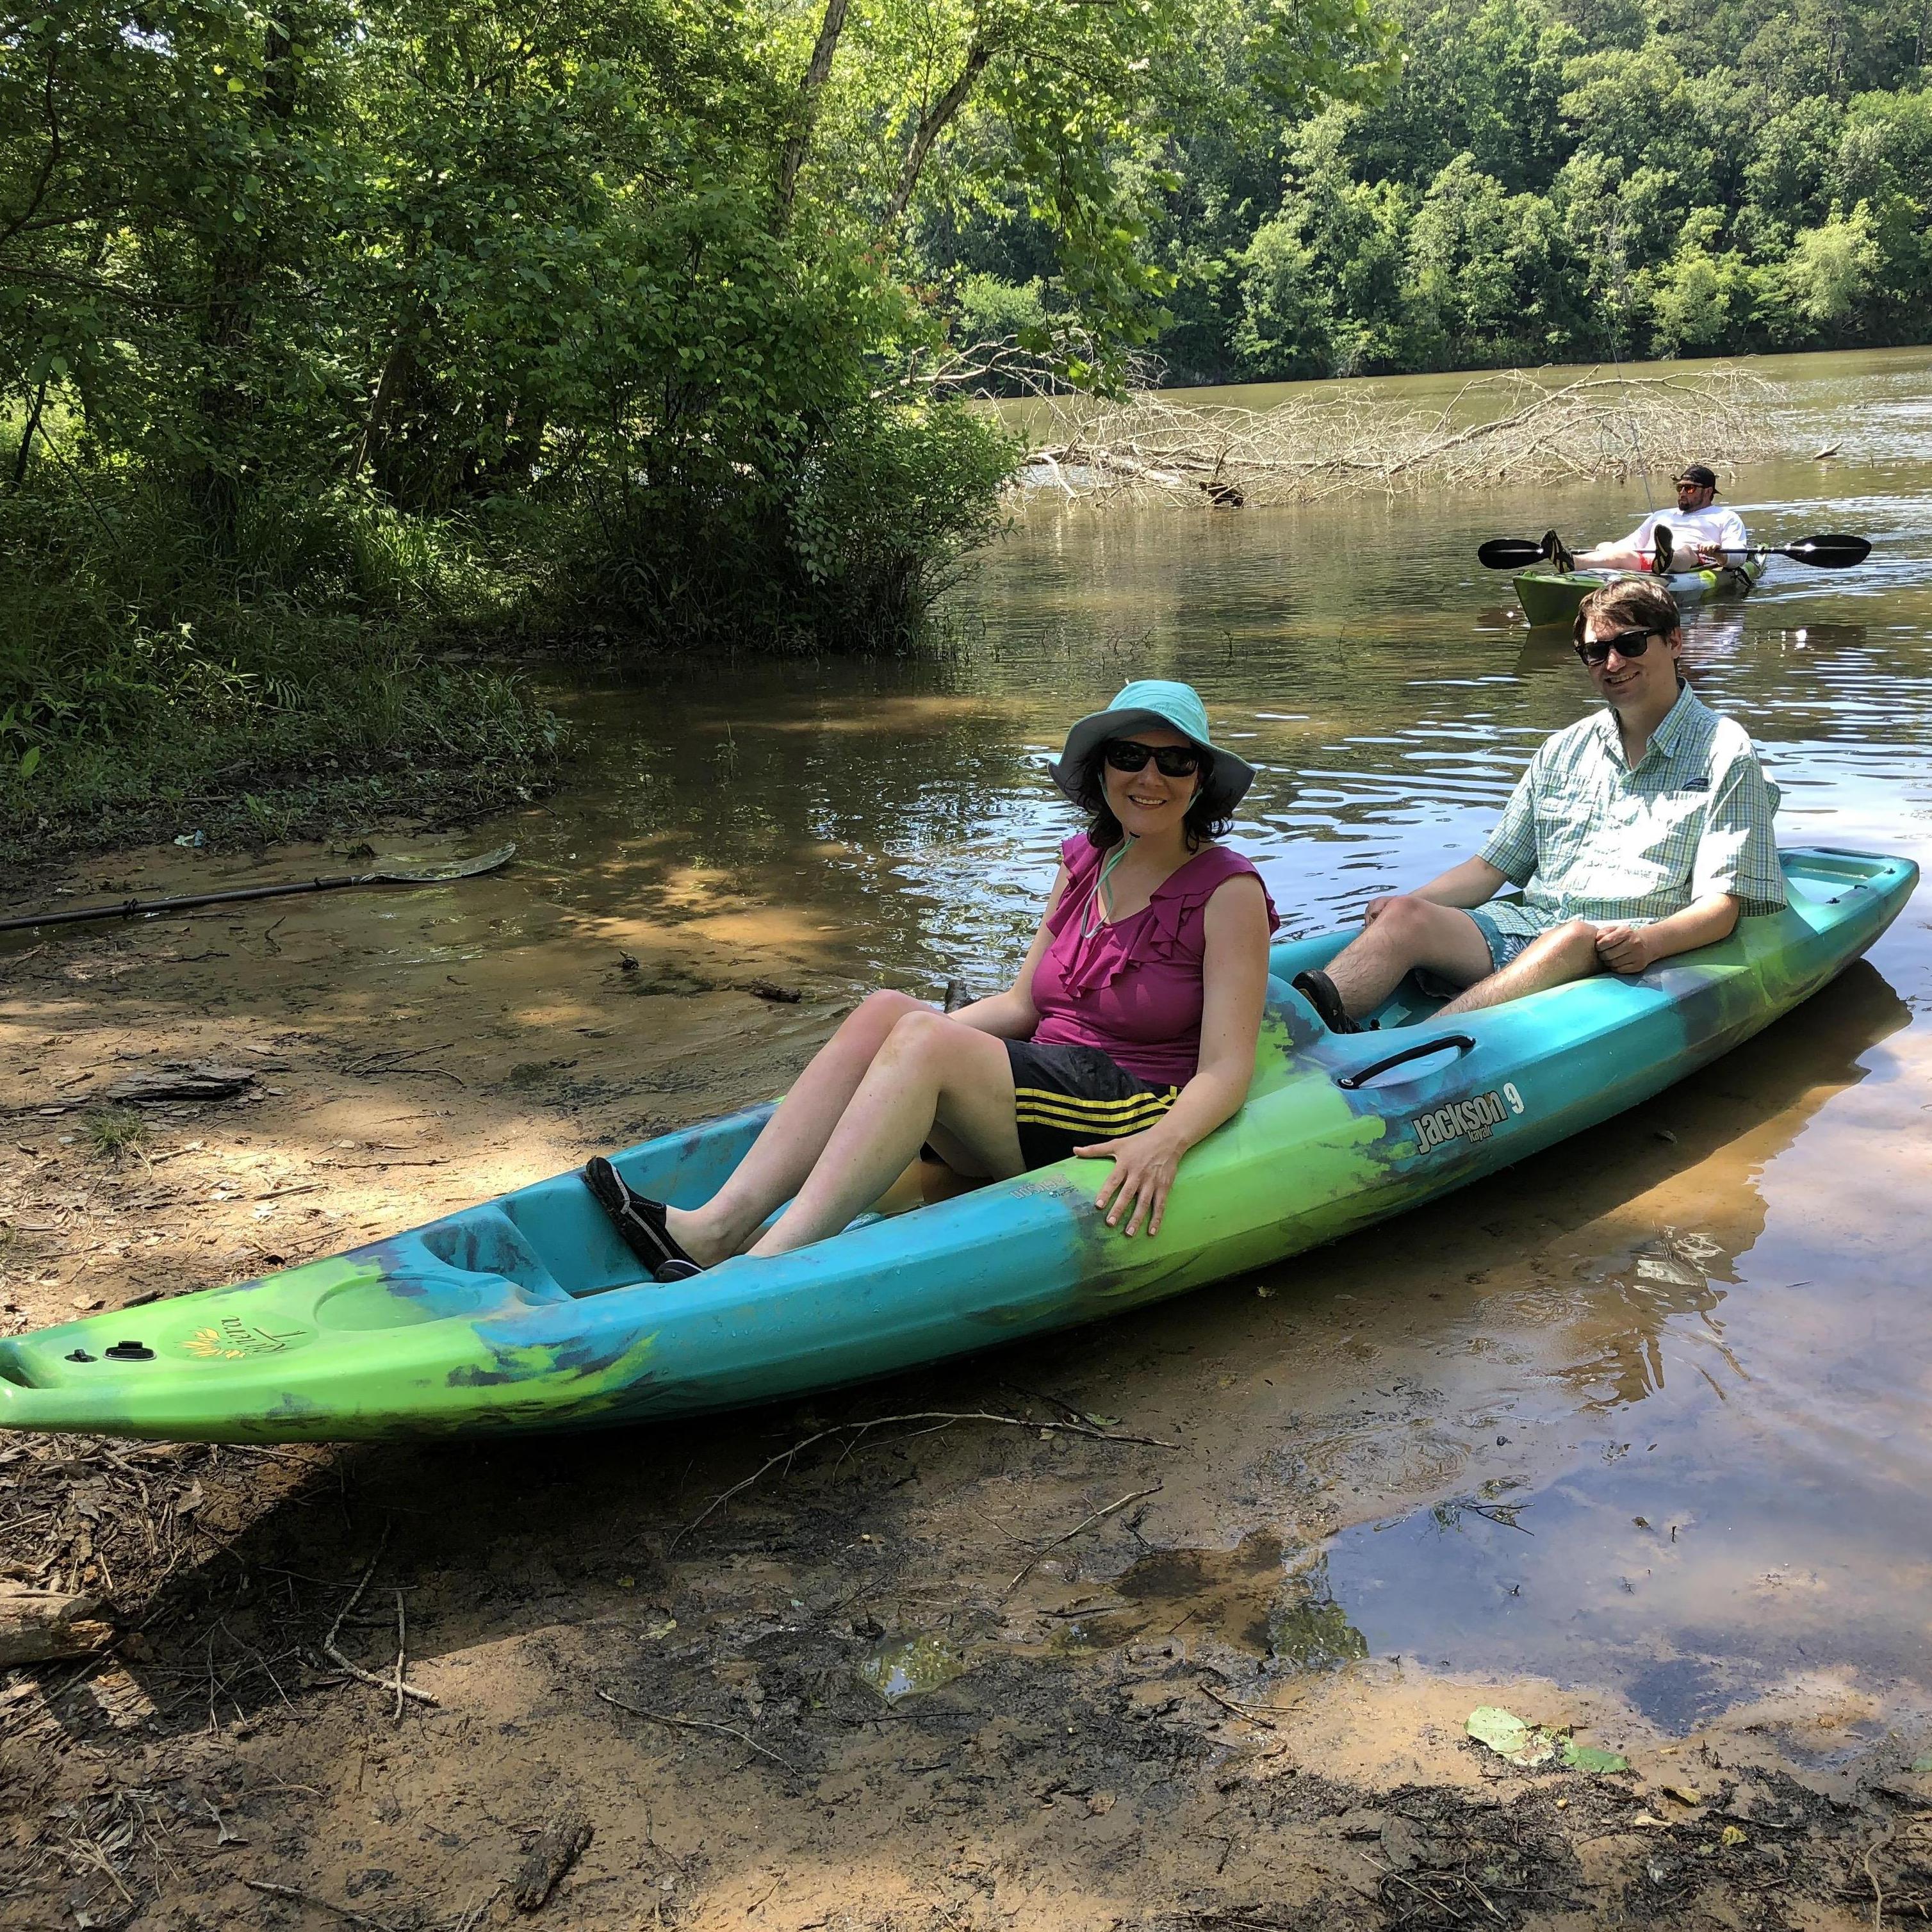 Kayaking on the Tallapoosa to see Cahaba lilies